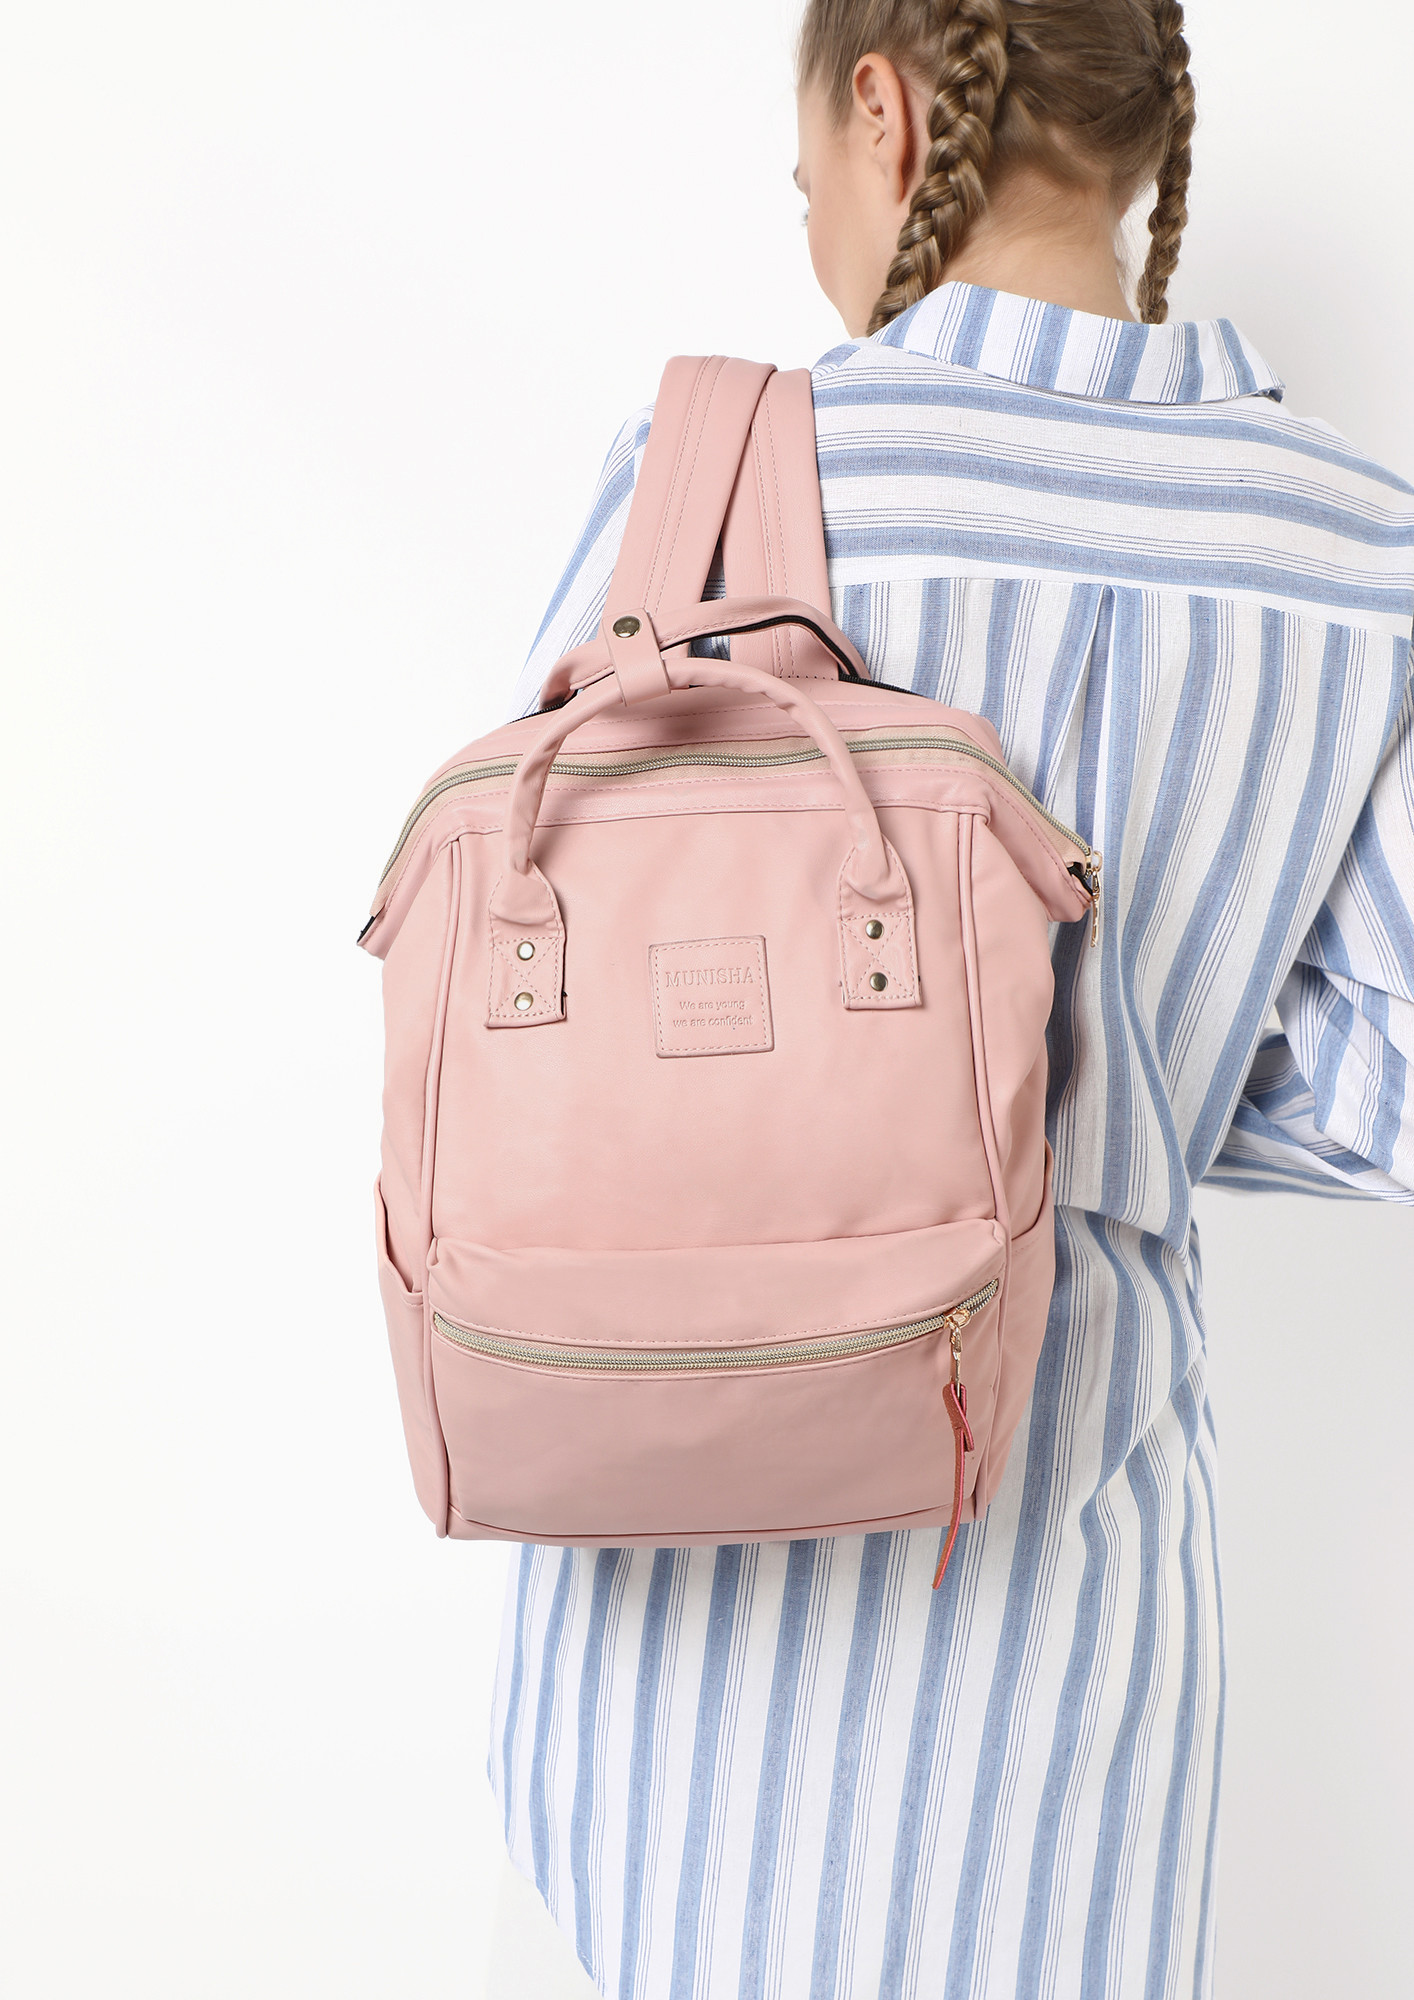 OLD-SCHOOL CHARM PINK BACKPACK